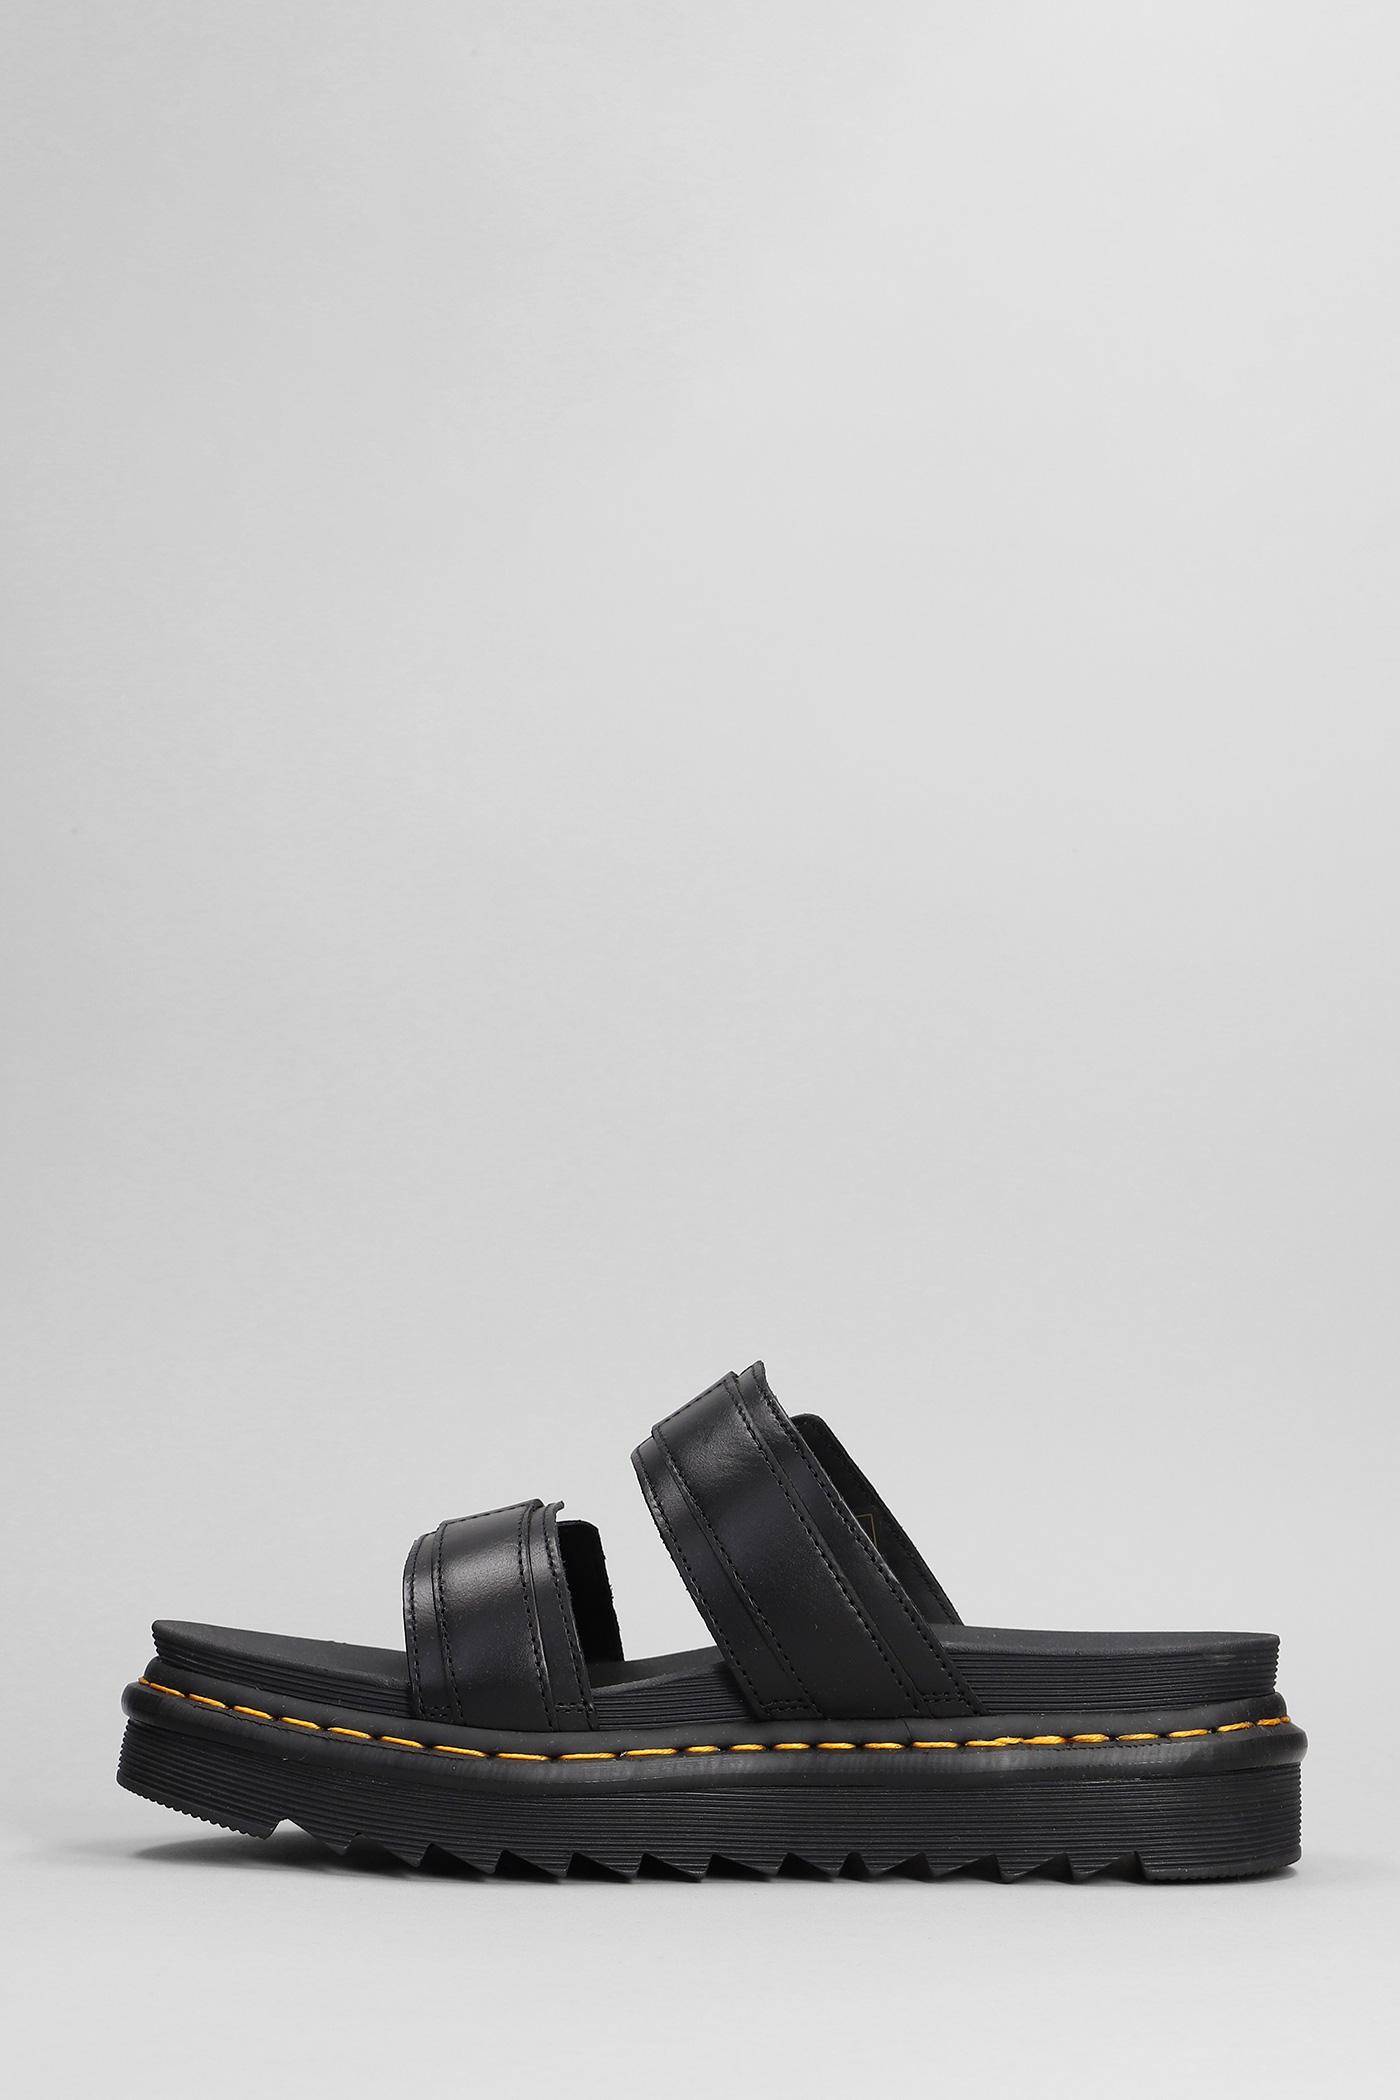 Dr. Martens Myles Flats In Black Leather for Men | Lyst